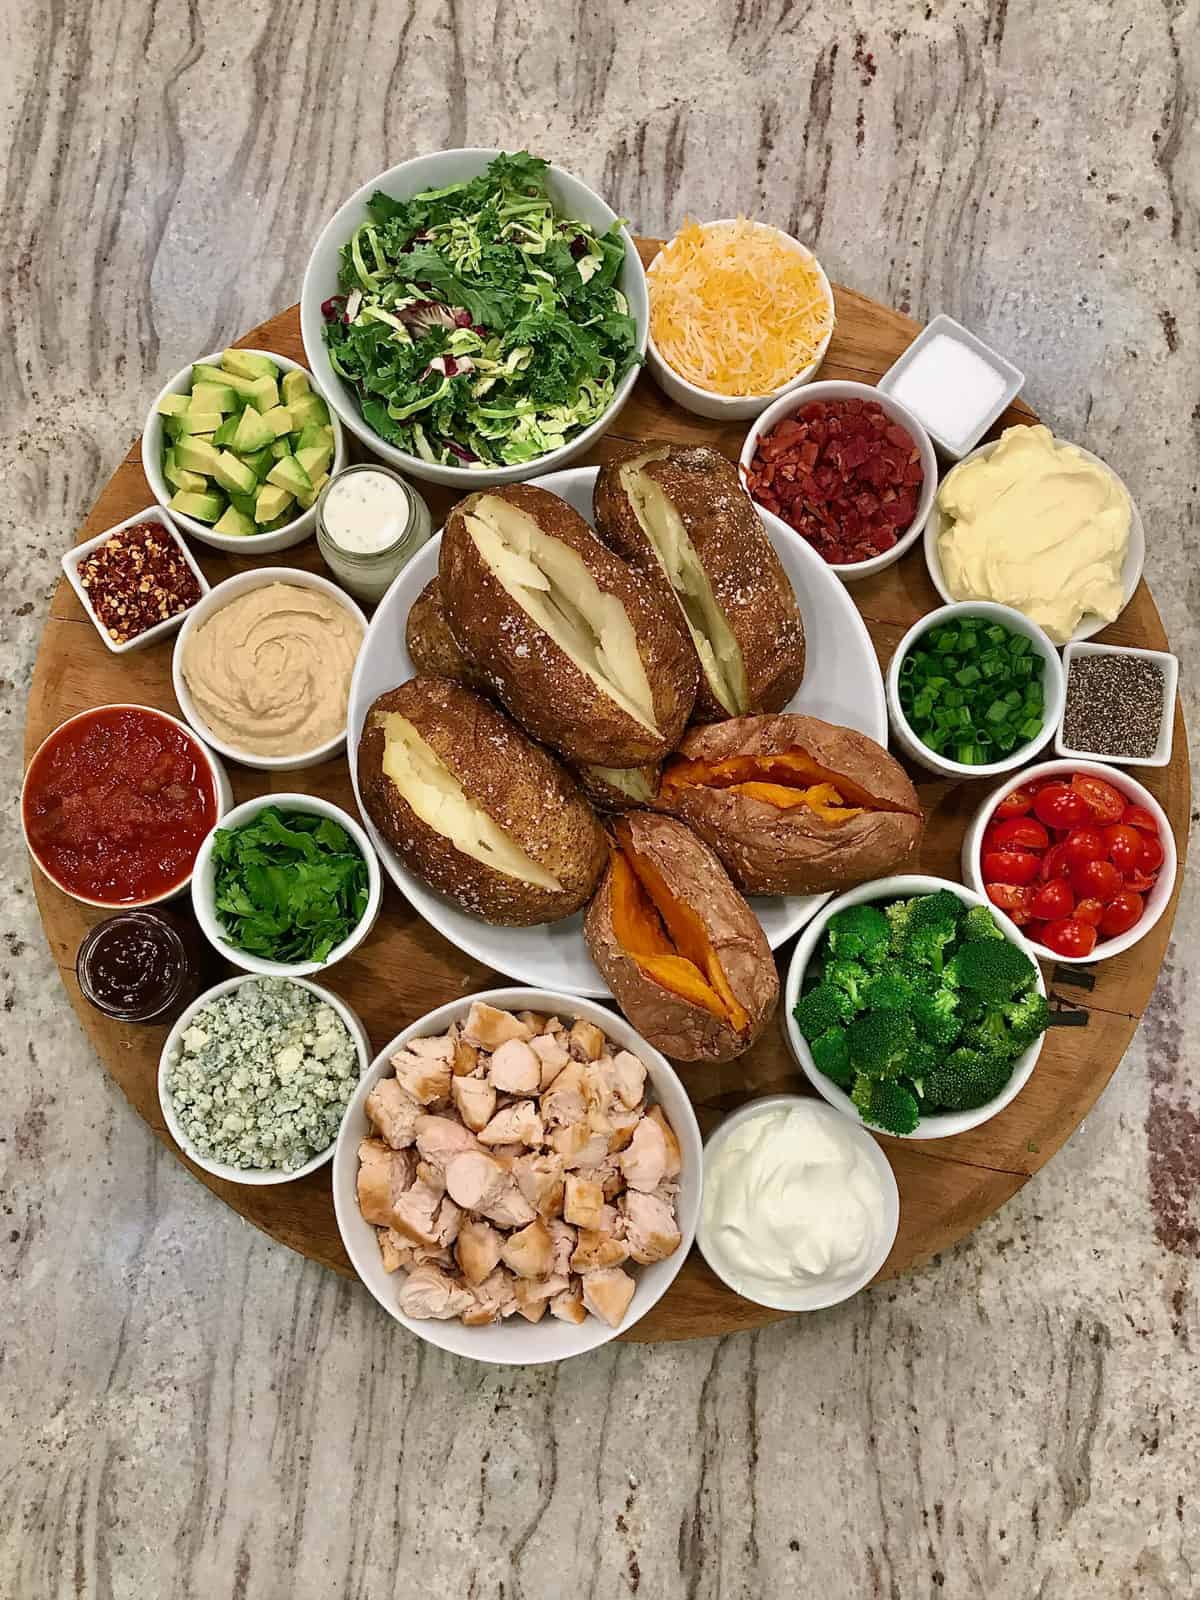 Build-Your-Own Baked Potato Board by The BakerMama